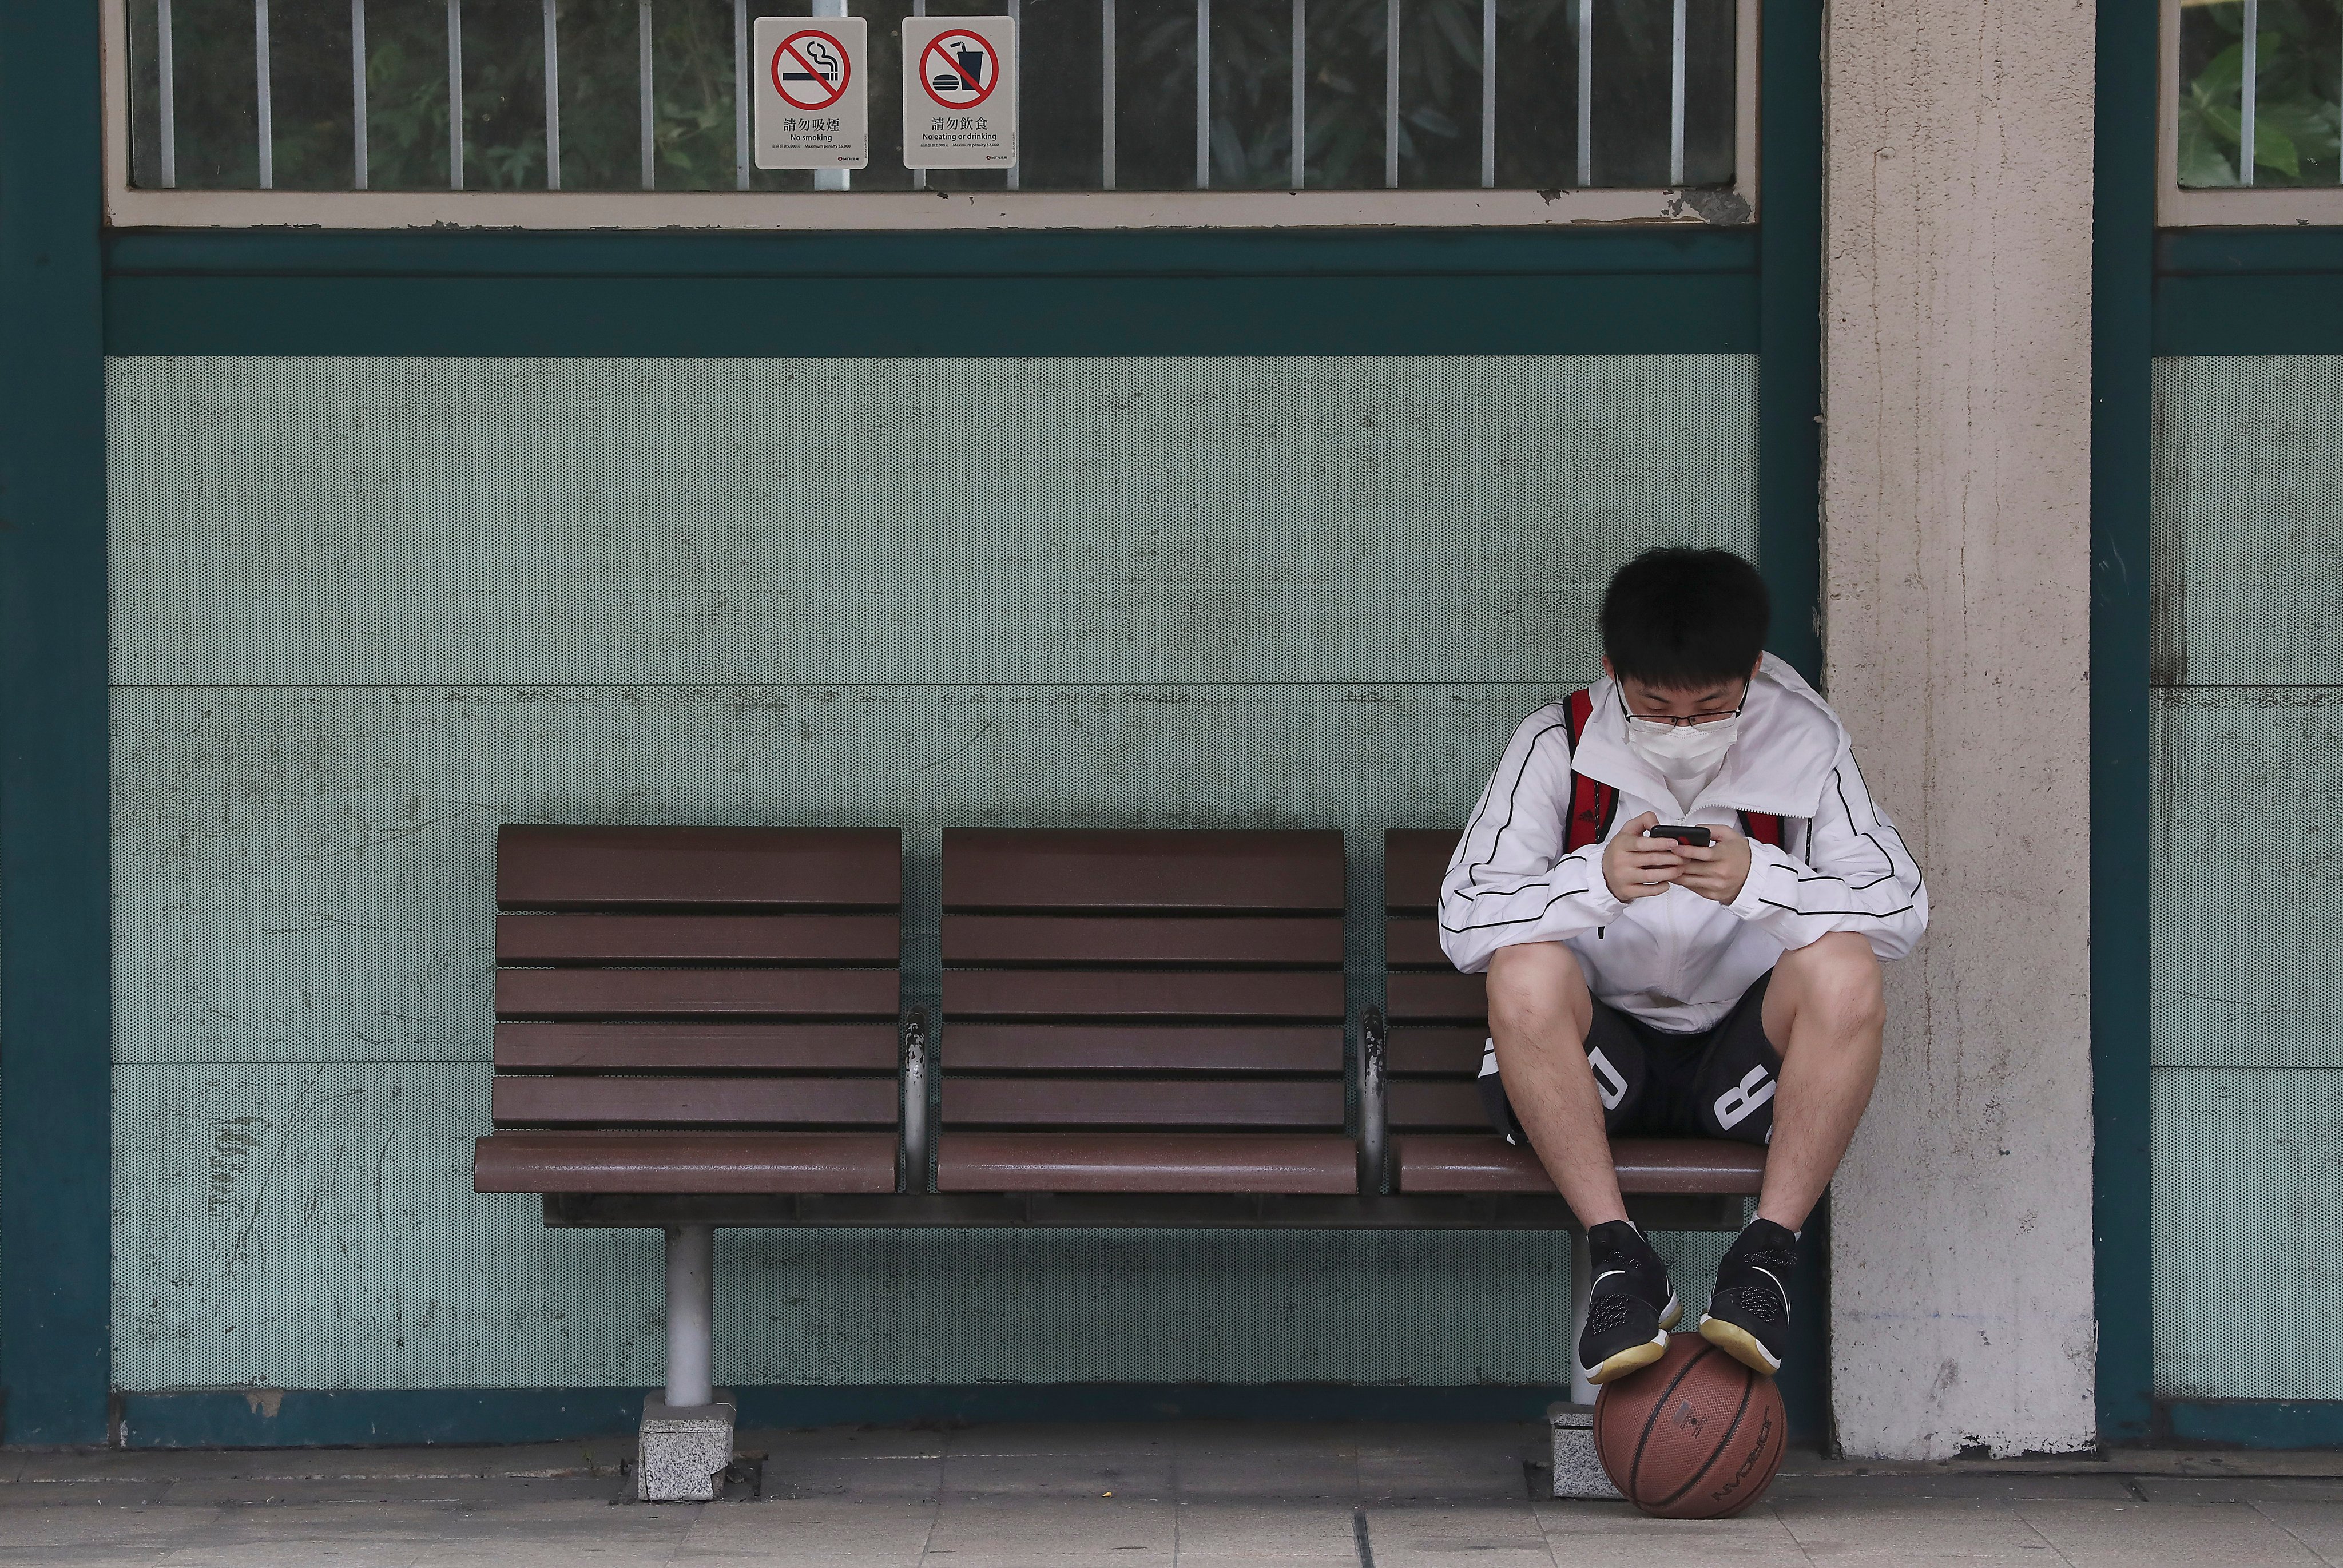 A student uses a mobile device at Kowloon Tong MTR station in 2020. Photo: Jonathan Wong